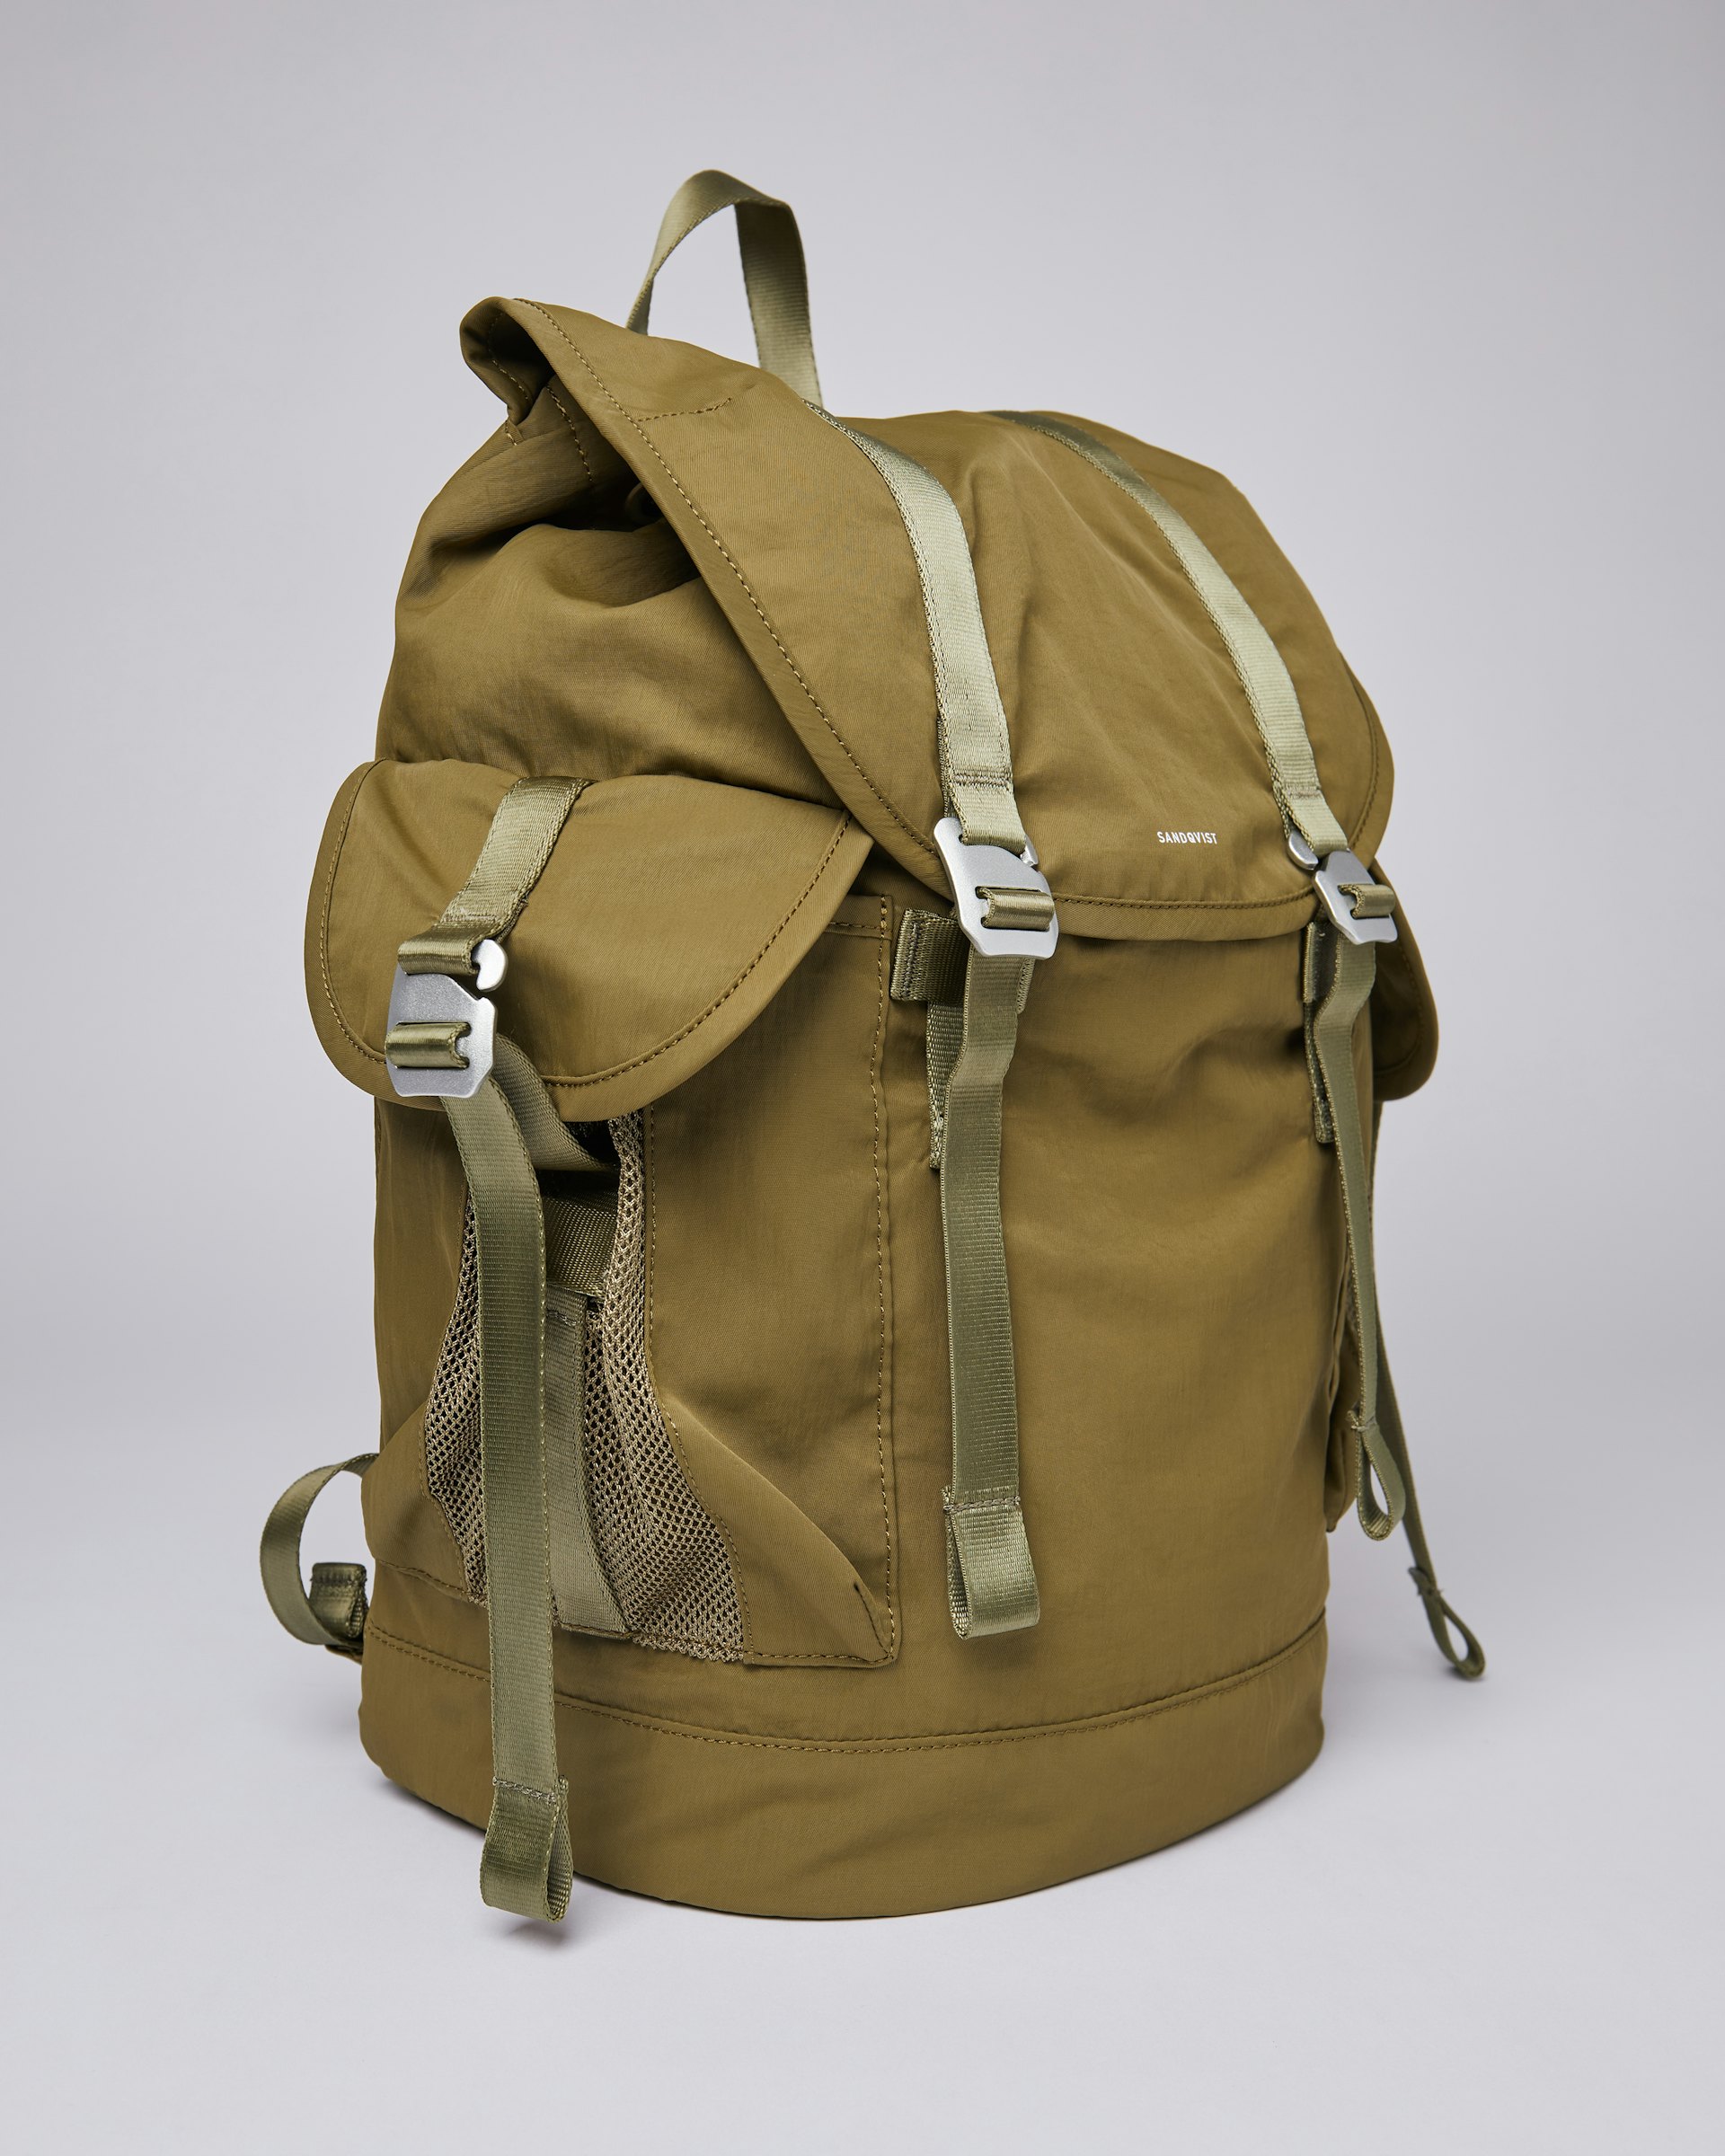 Charlie Vegan belongs to the category Backpacks and is in color military olive (4 of 7)